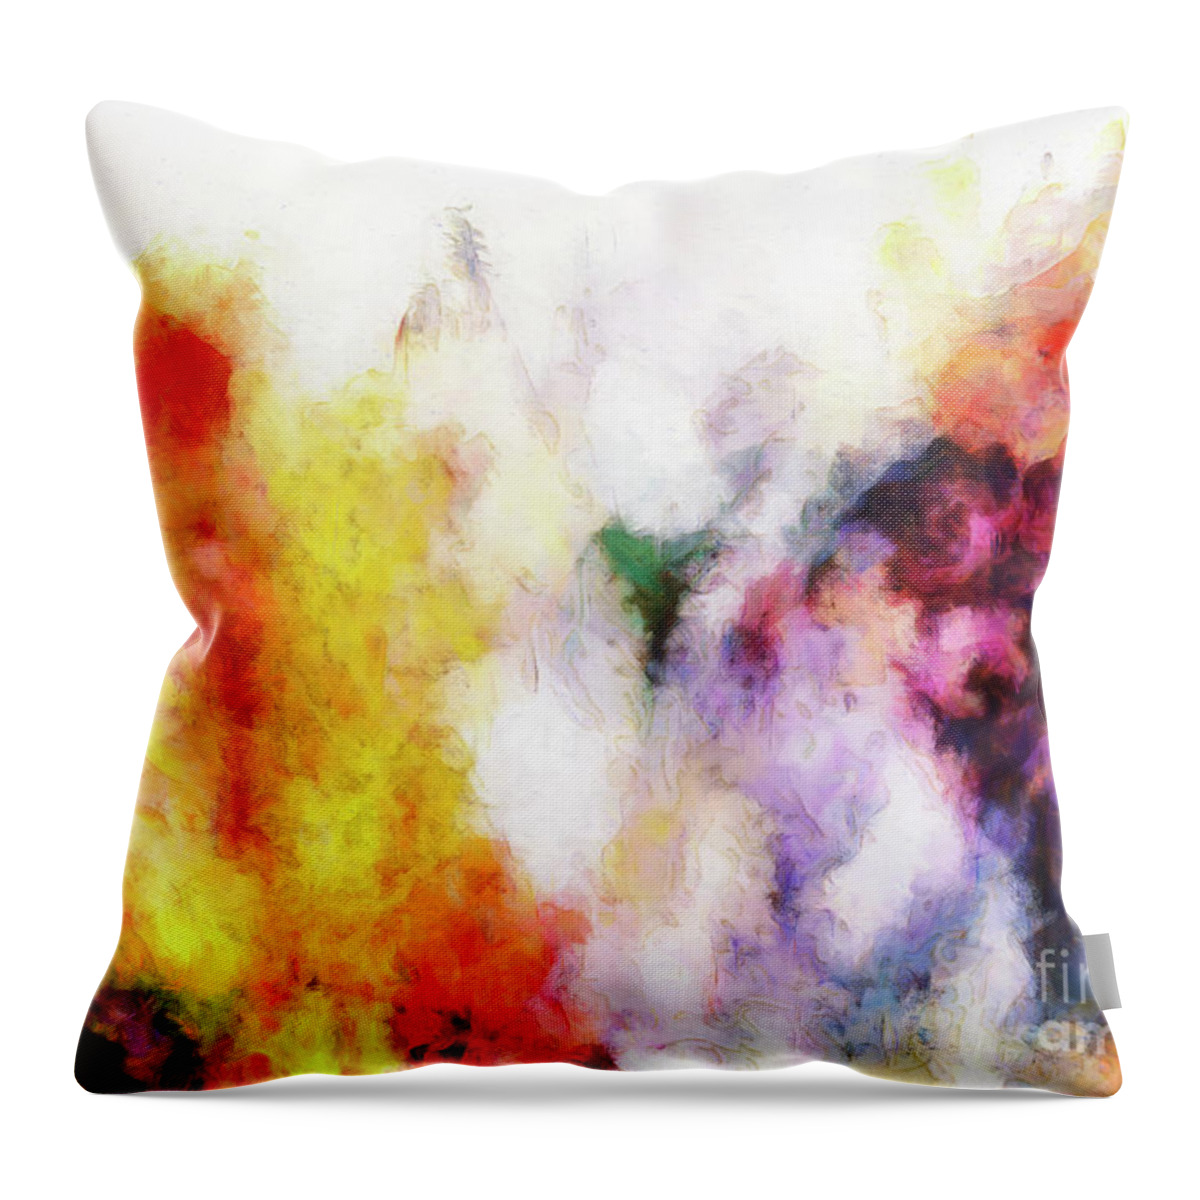 Abstract Floral Art Throw Pillow featuring the digital art Abstract Flowers by Claire Bull